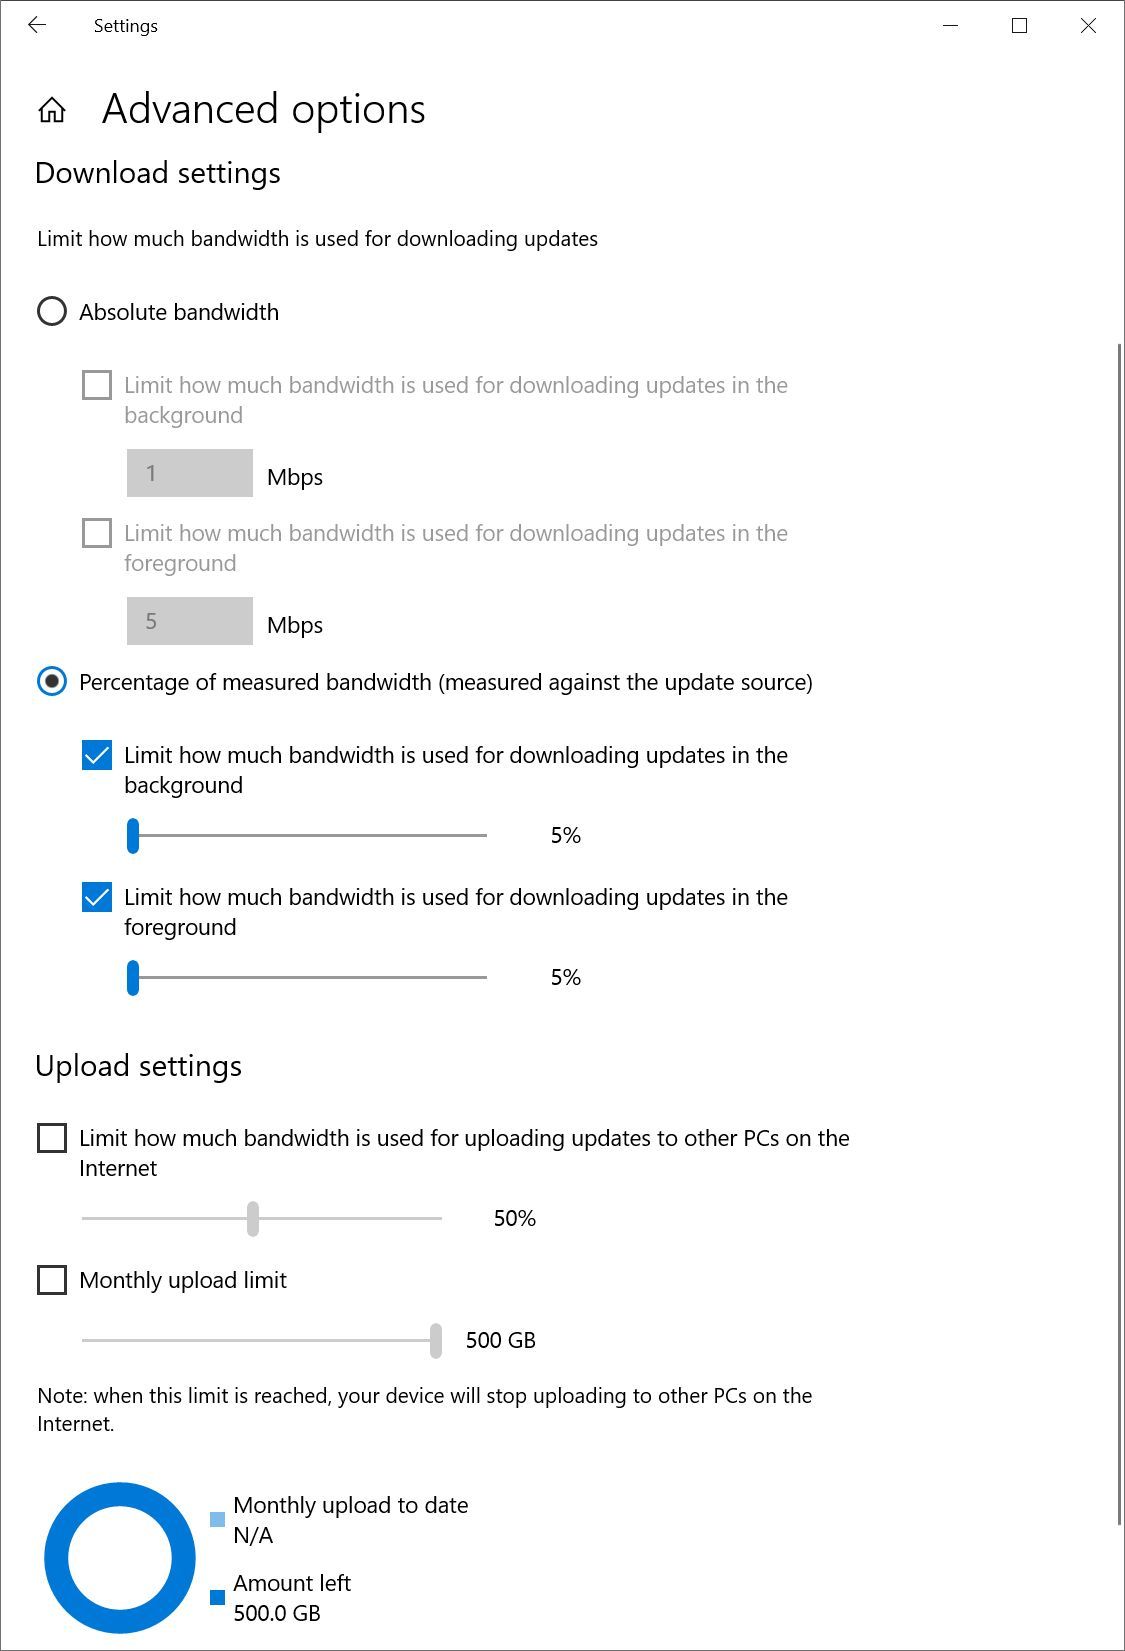 Advanced options for Delivery Optimization in Windows 10 Windows Update Settings menu.